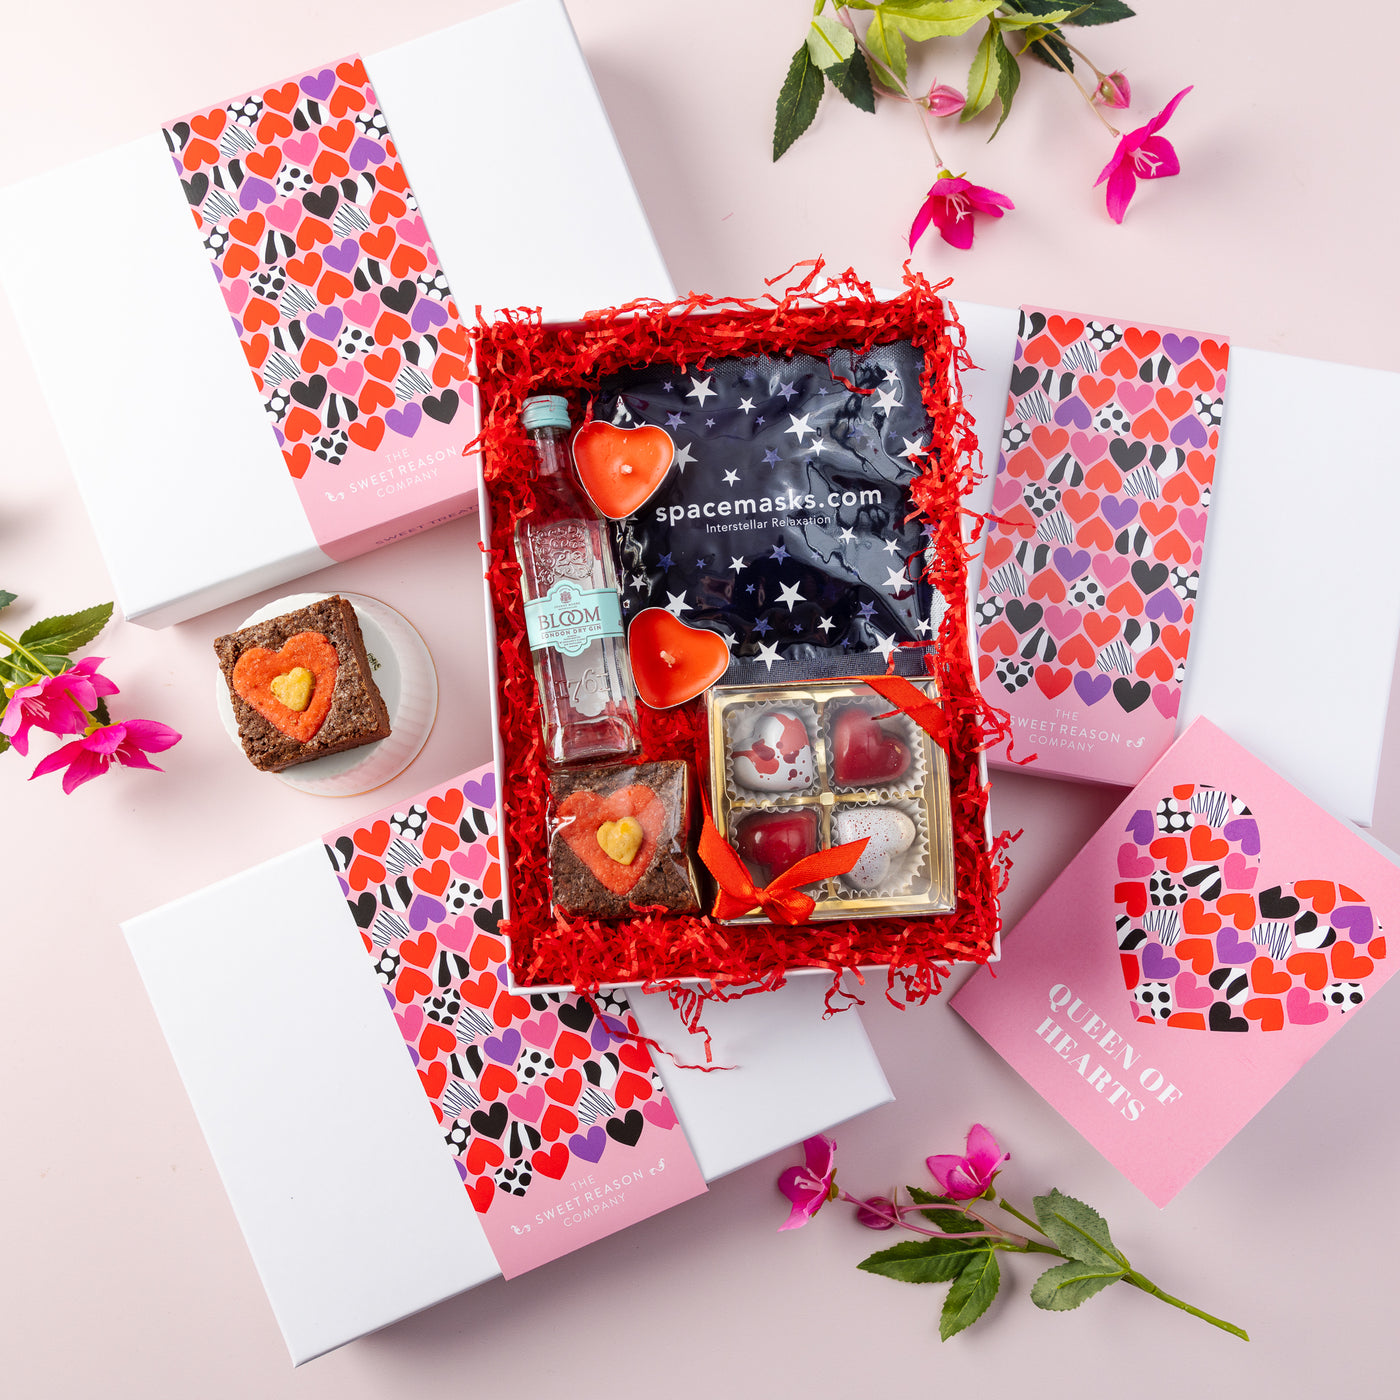 'Queen of Hearts' Relaxation and Gin Valentine's Day Hamper